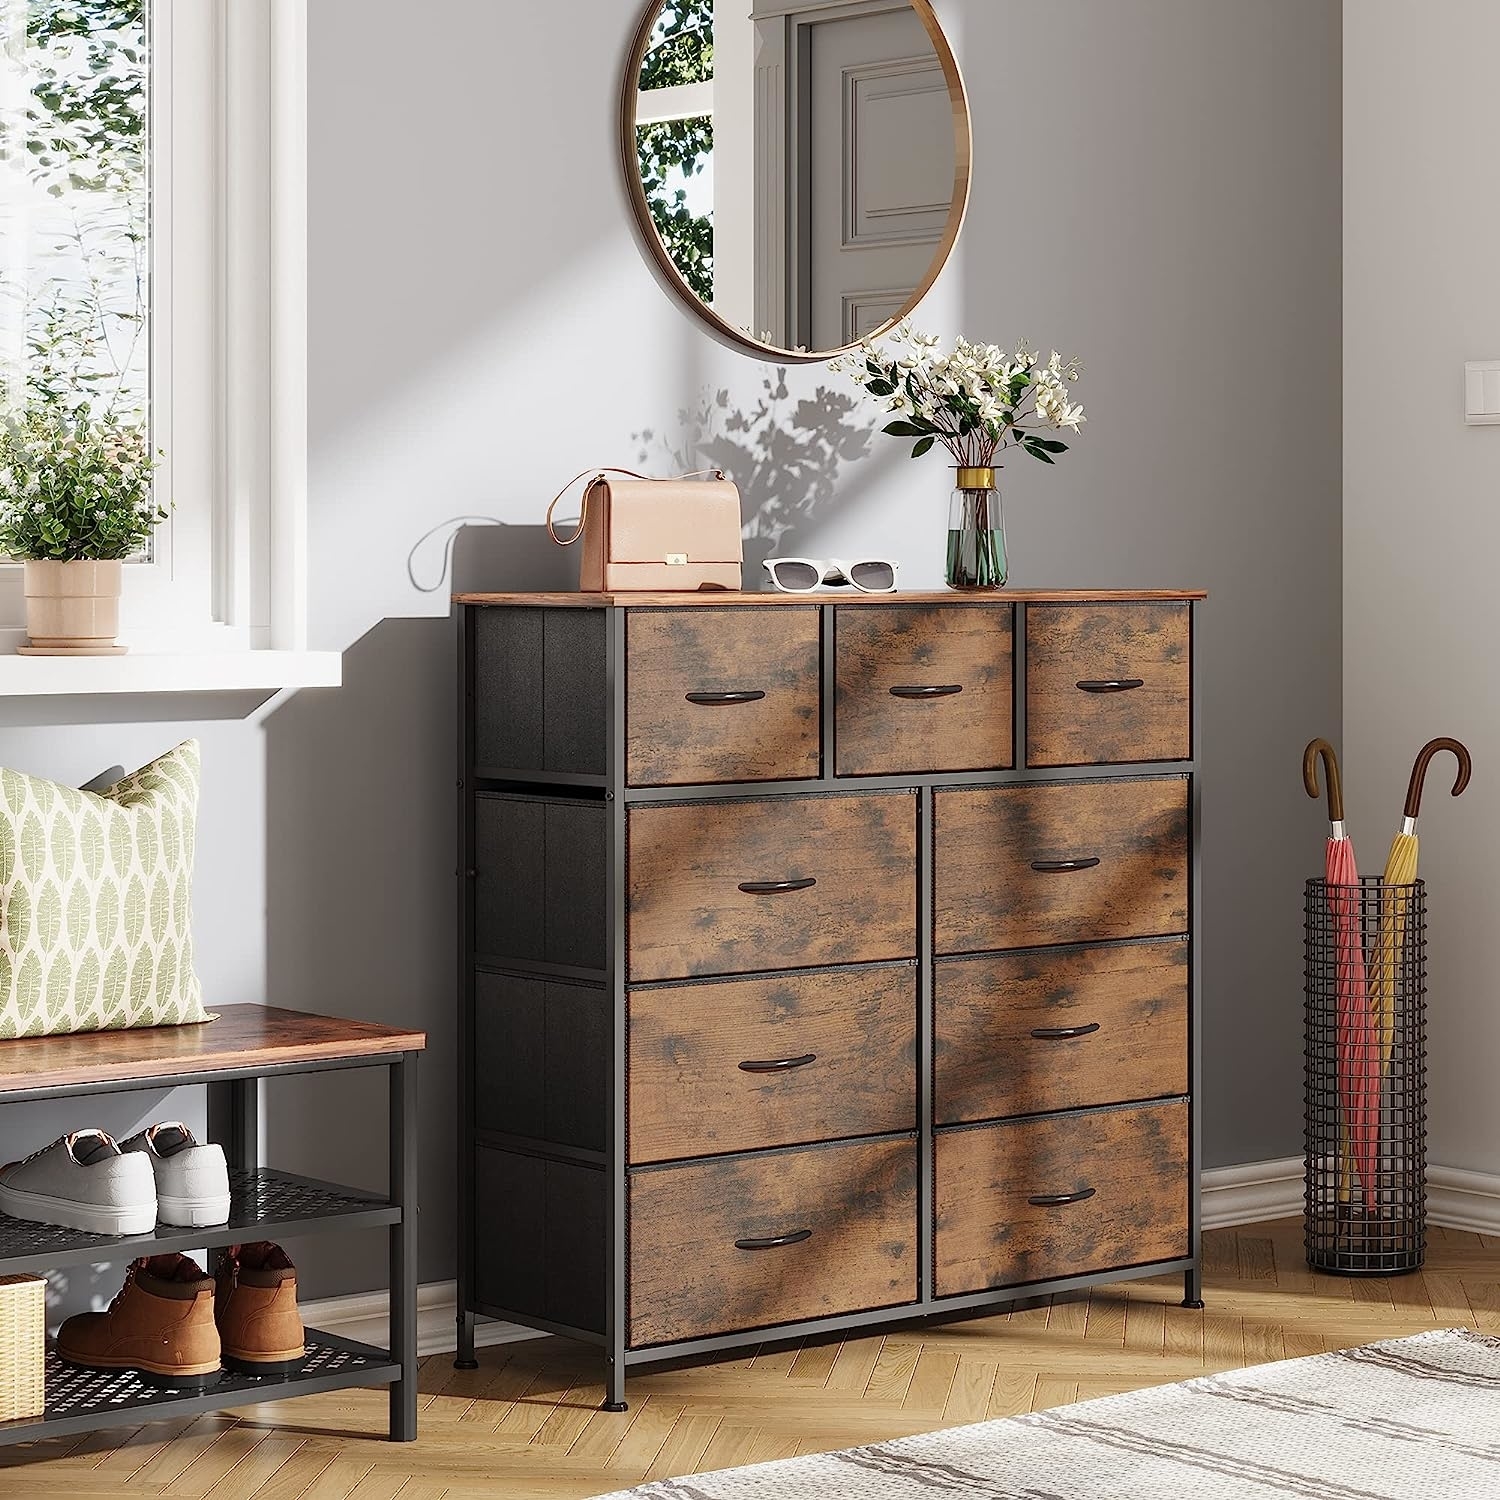 The dresser in a rustic brown color